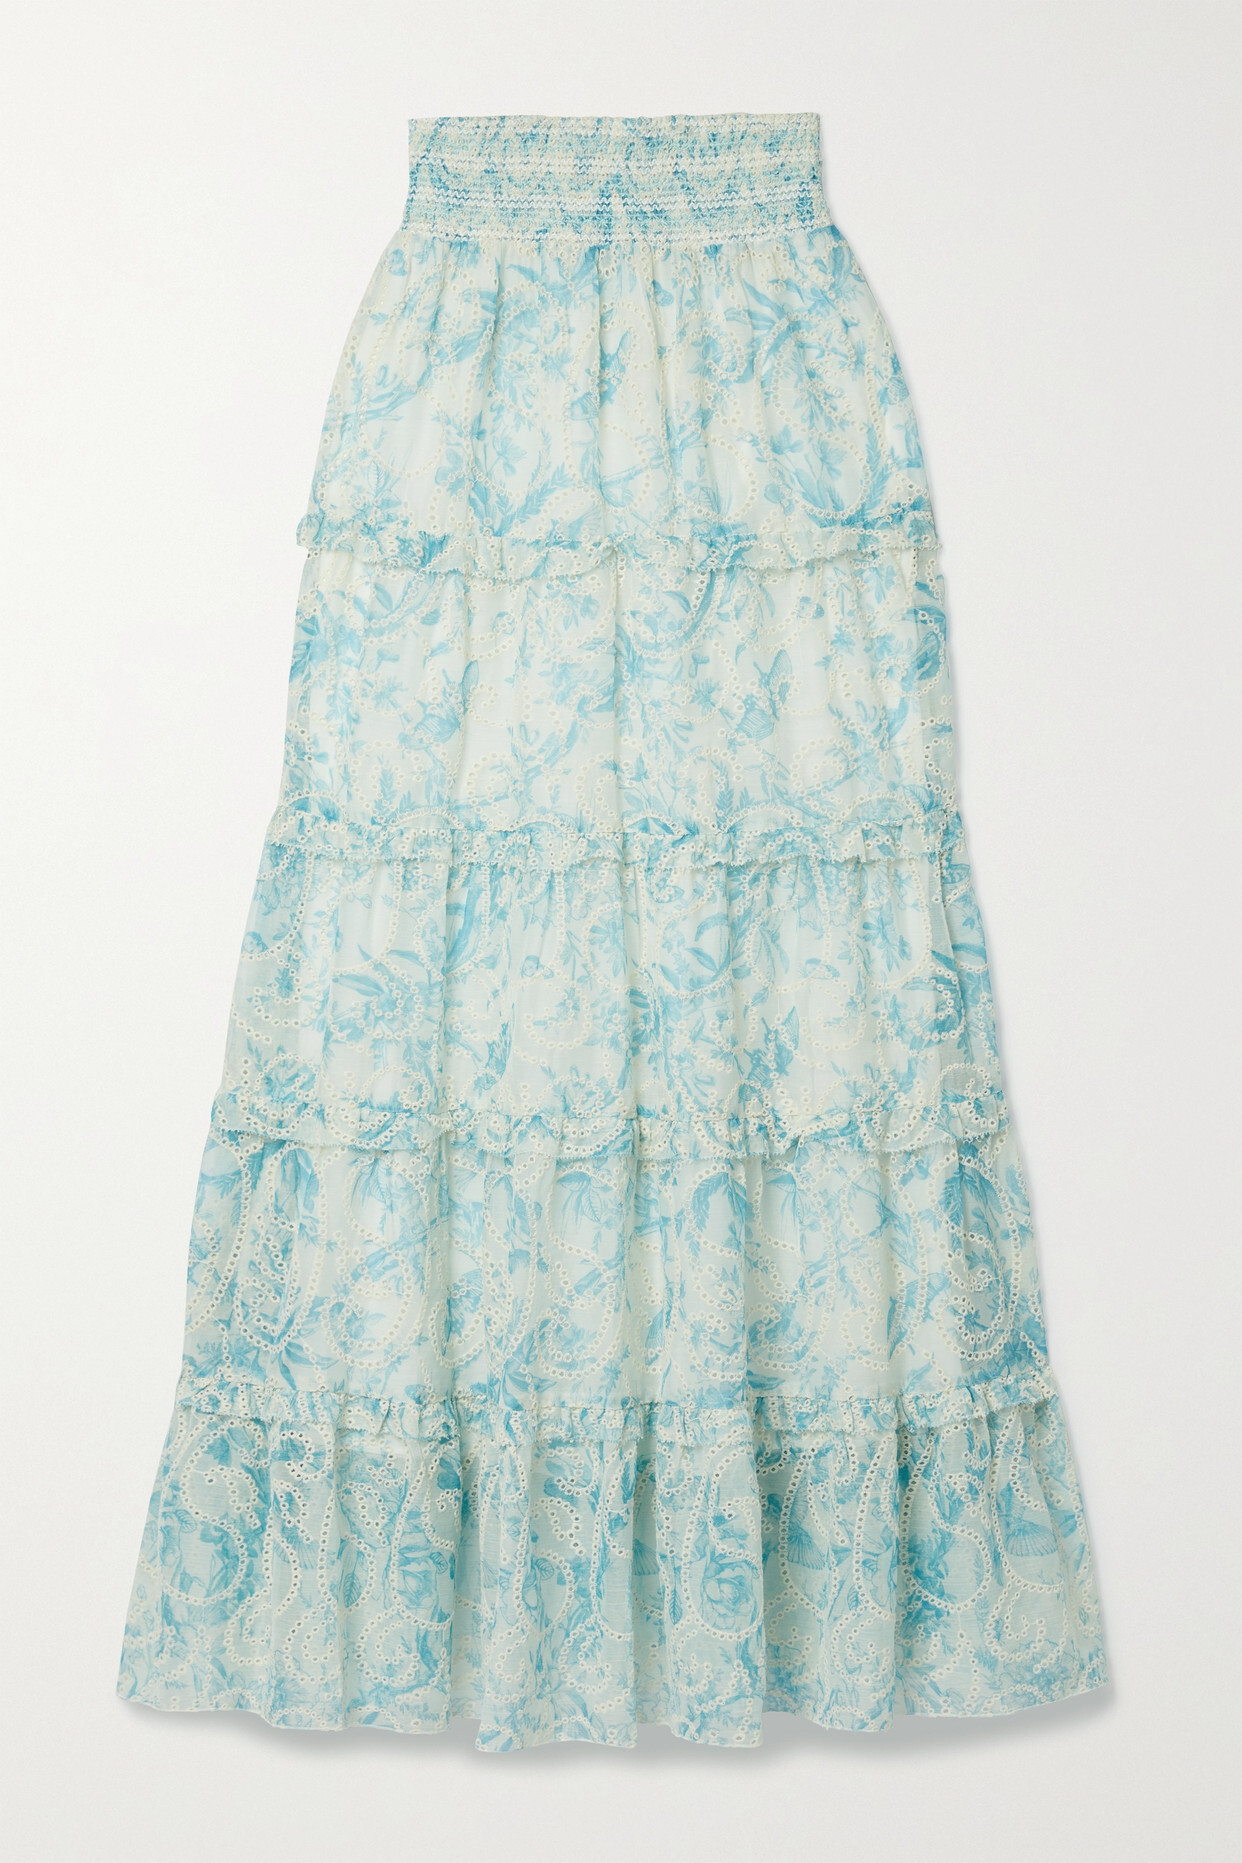 Alice + Olivia Alice + Olivia - Aisha Ruffled Tiered Printed Broderie Anglaise Voile Maxi Skirt - White